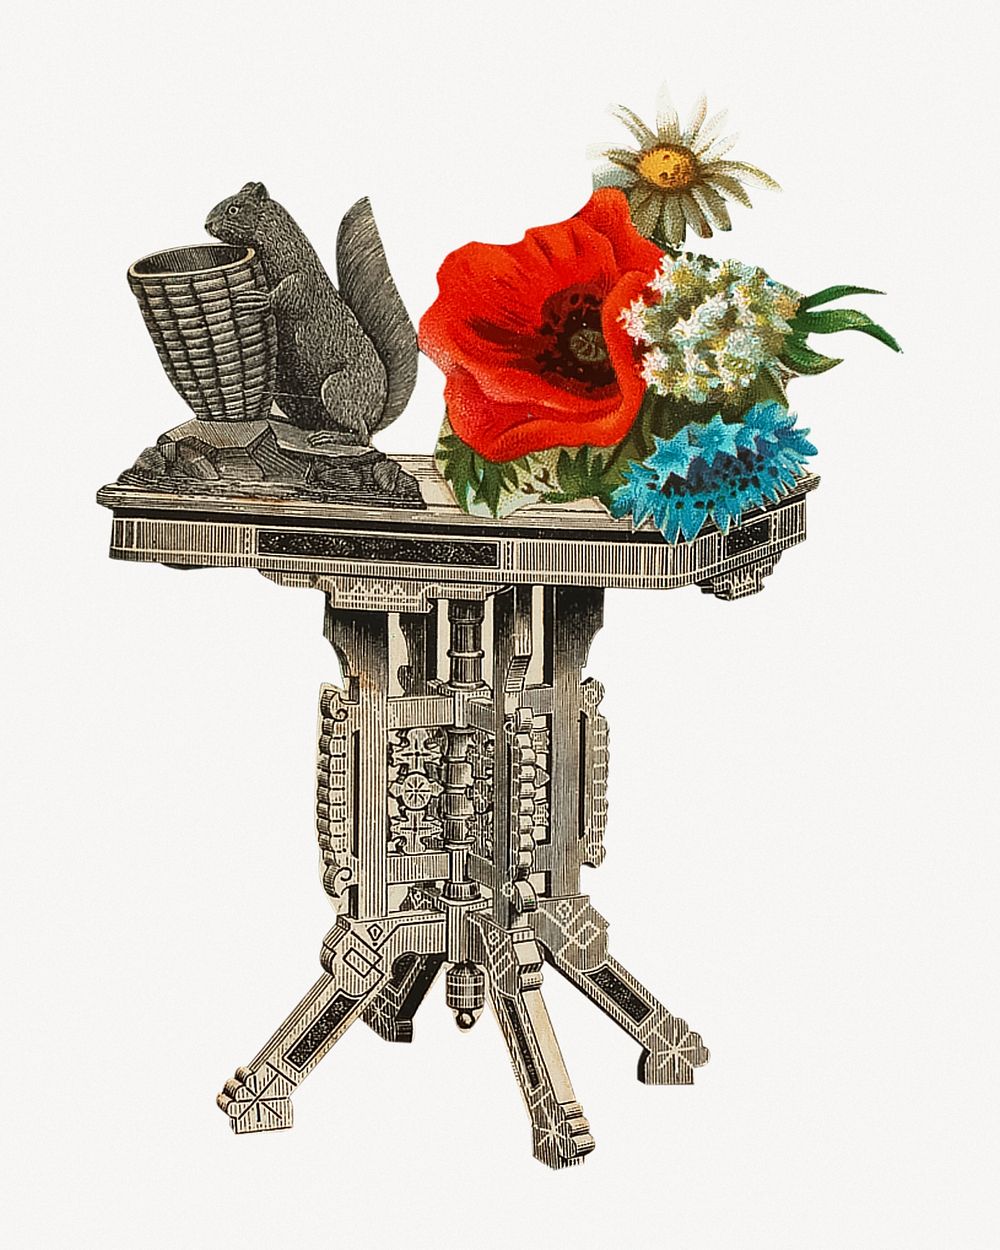 Victorian side table, vintage furniture illustration.  Remastered by rawpixel.